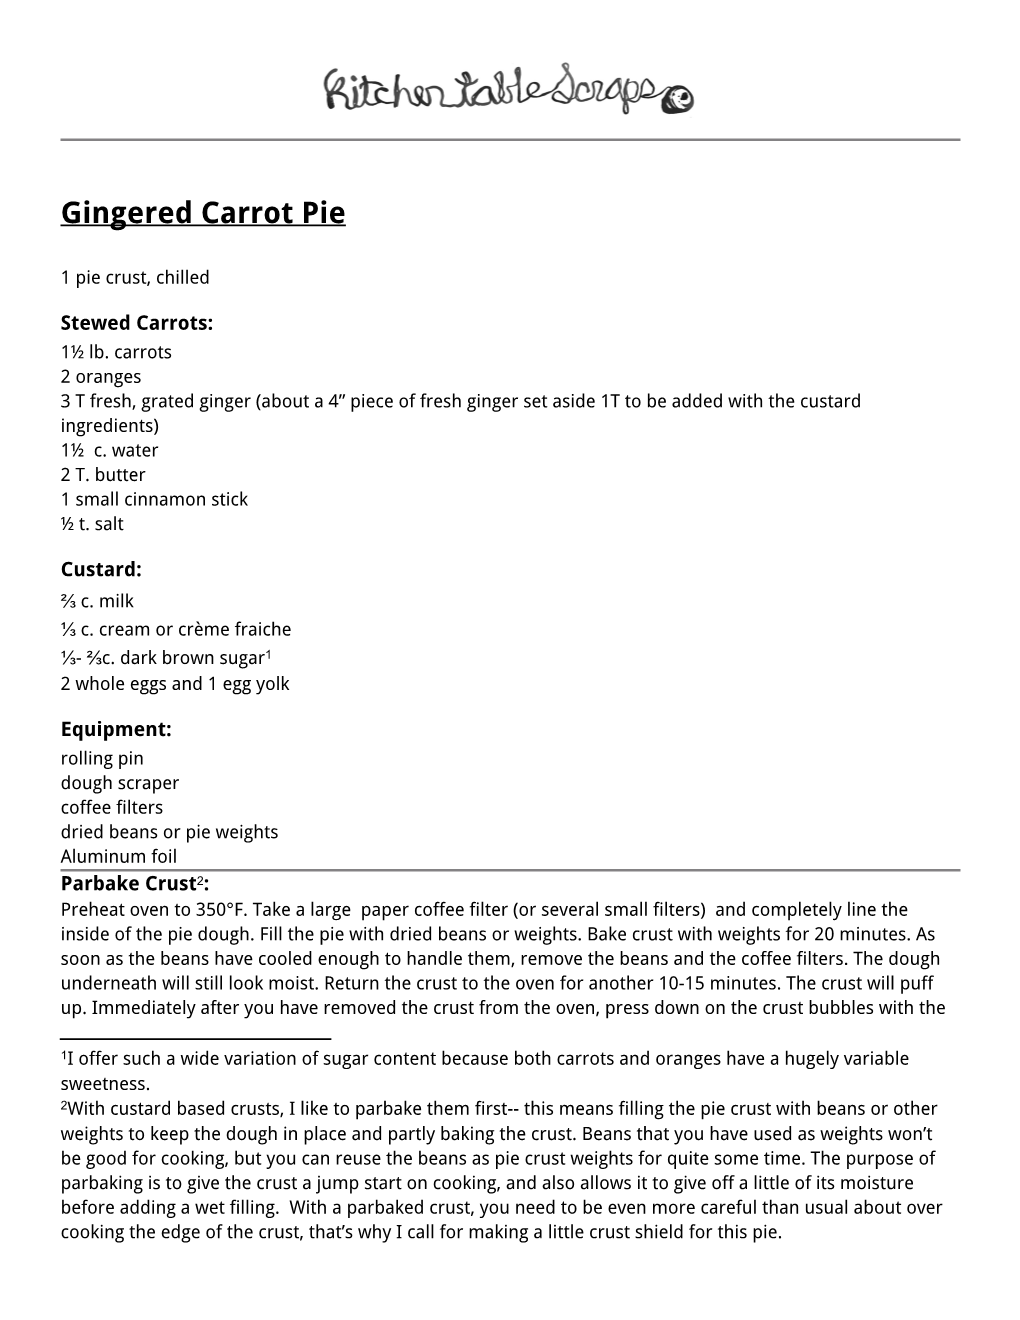 Gingered Carrot Pie